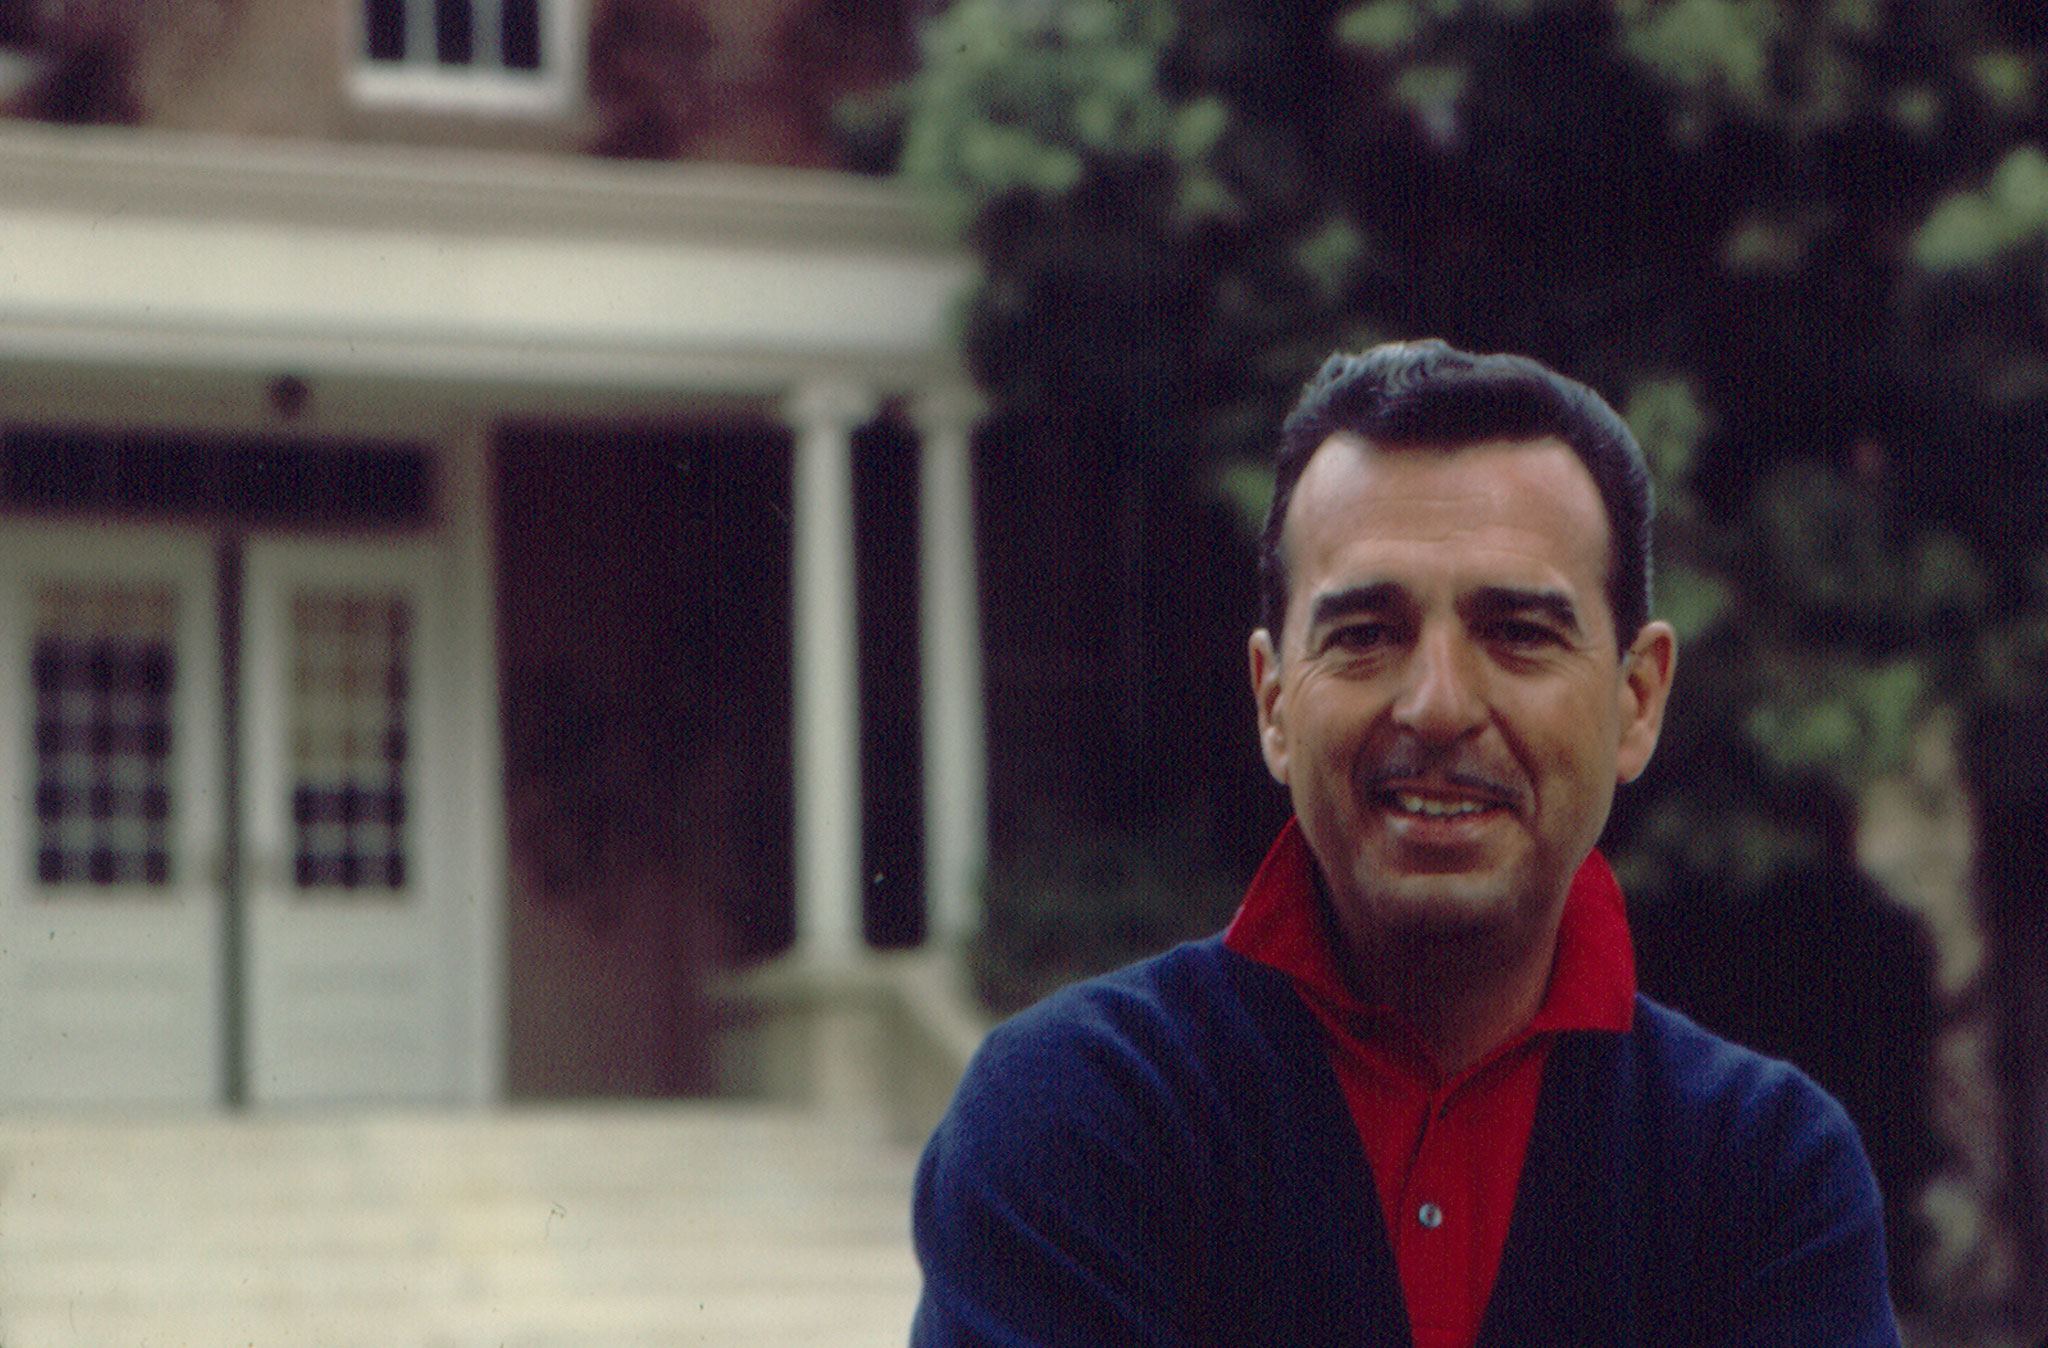 20-facts-about-tennessee-ernie-ford